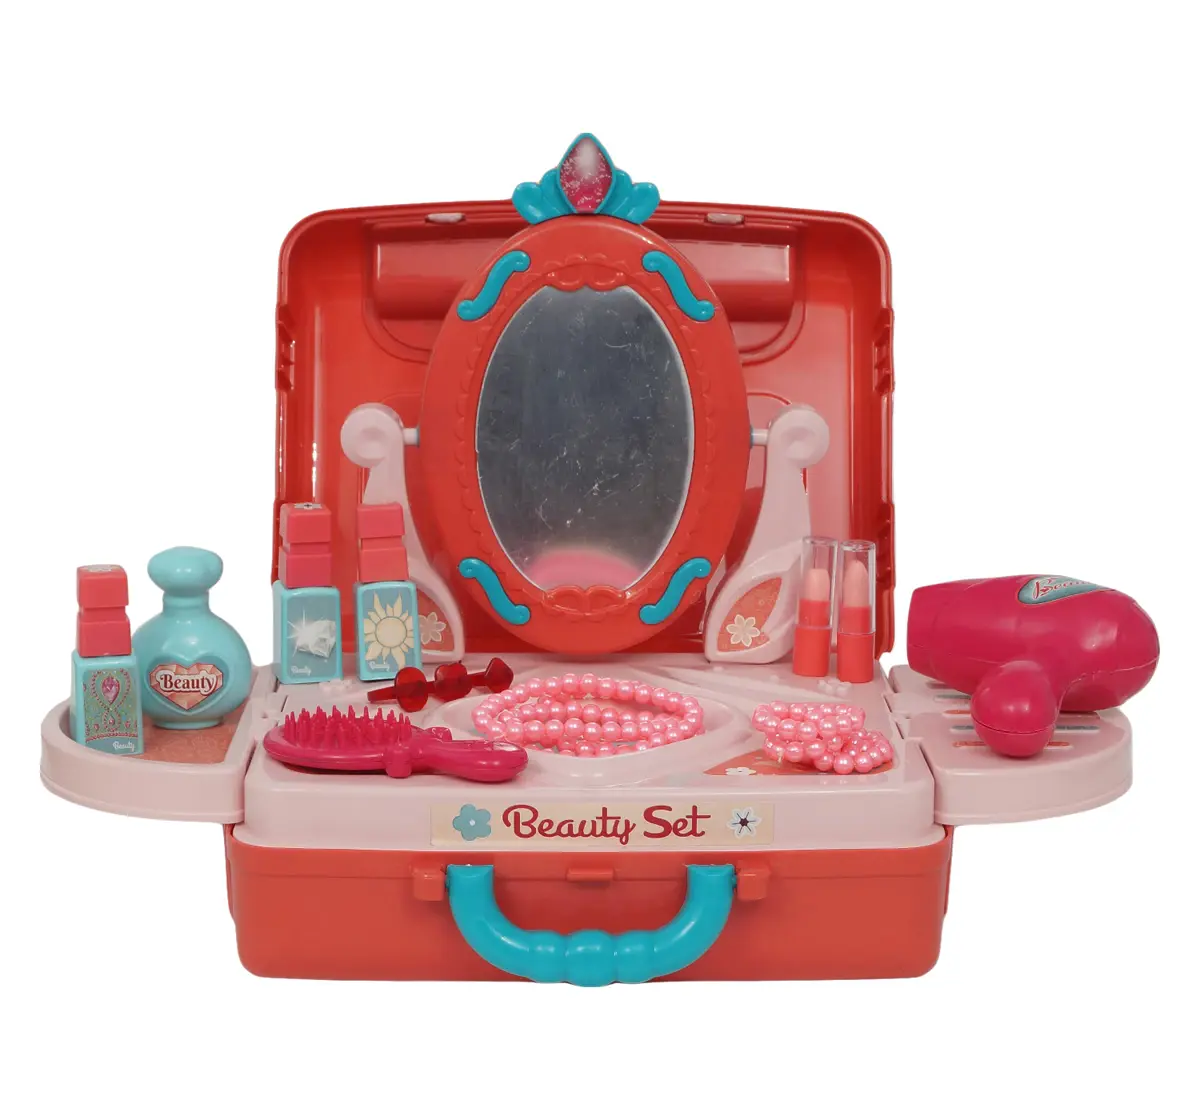 Beauty Set briefcase 2 in 1